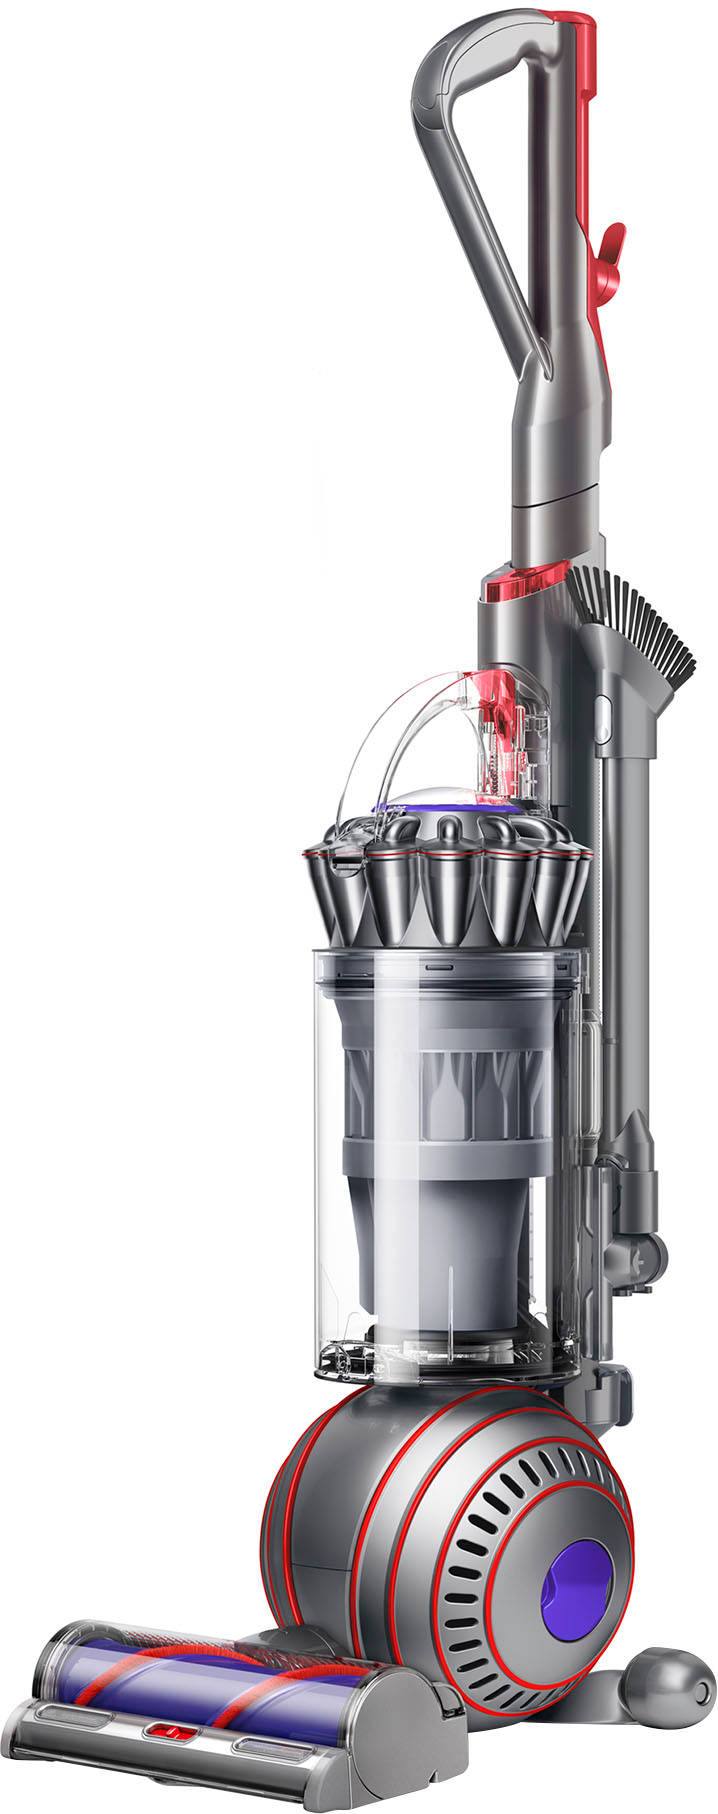 Angle View: Dyson - Ball Animal 3 Upright Vacuum with 2 accessories - Nickel/Silver